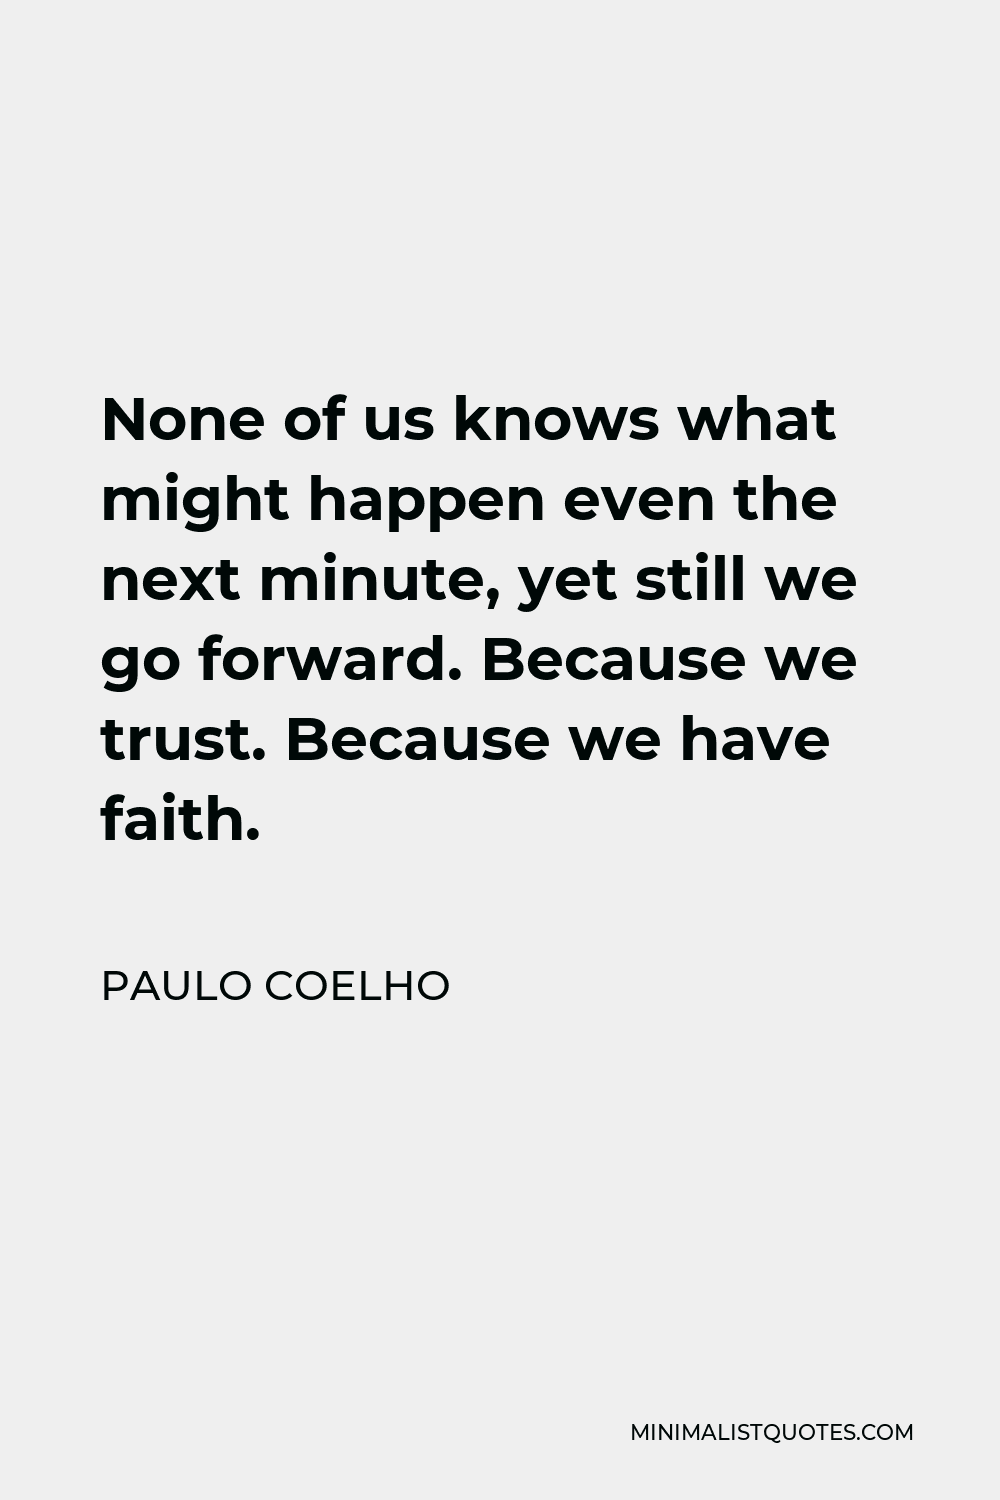 Paulo Coelho Quote - None of us knows what might happen even the next minute, yet still we go forward. Because we trust. Because we have faith.